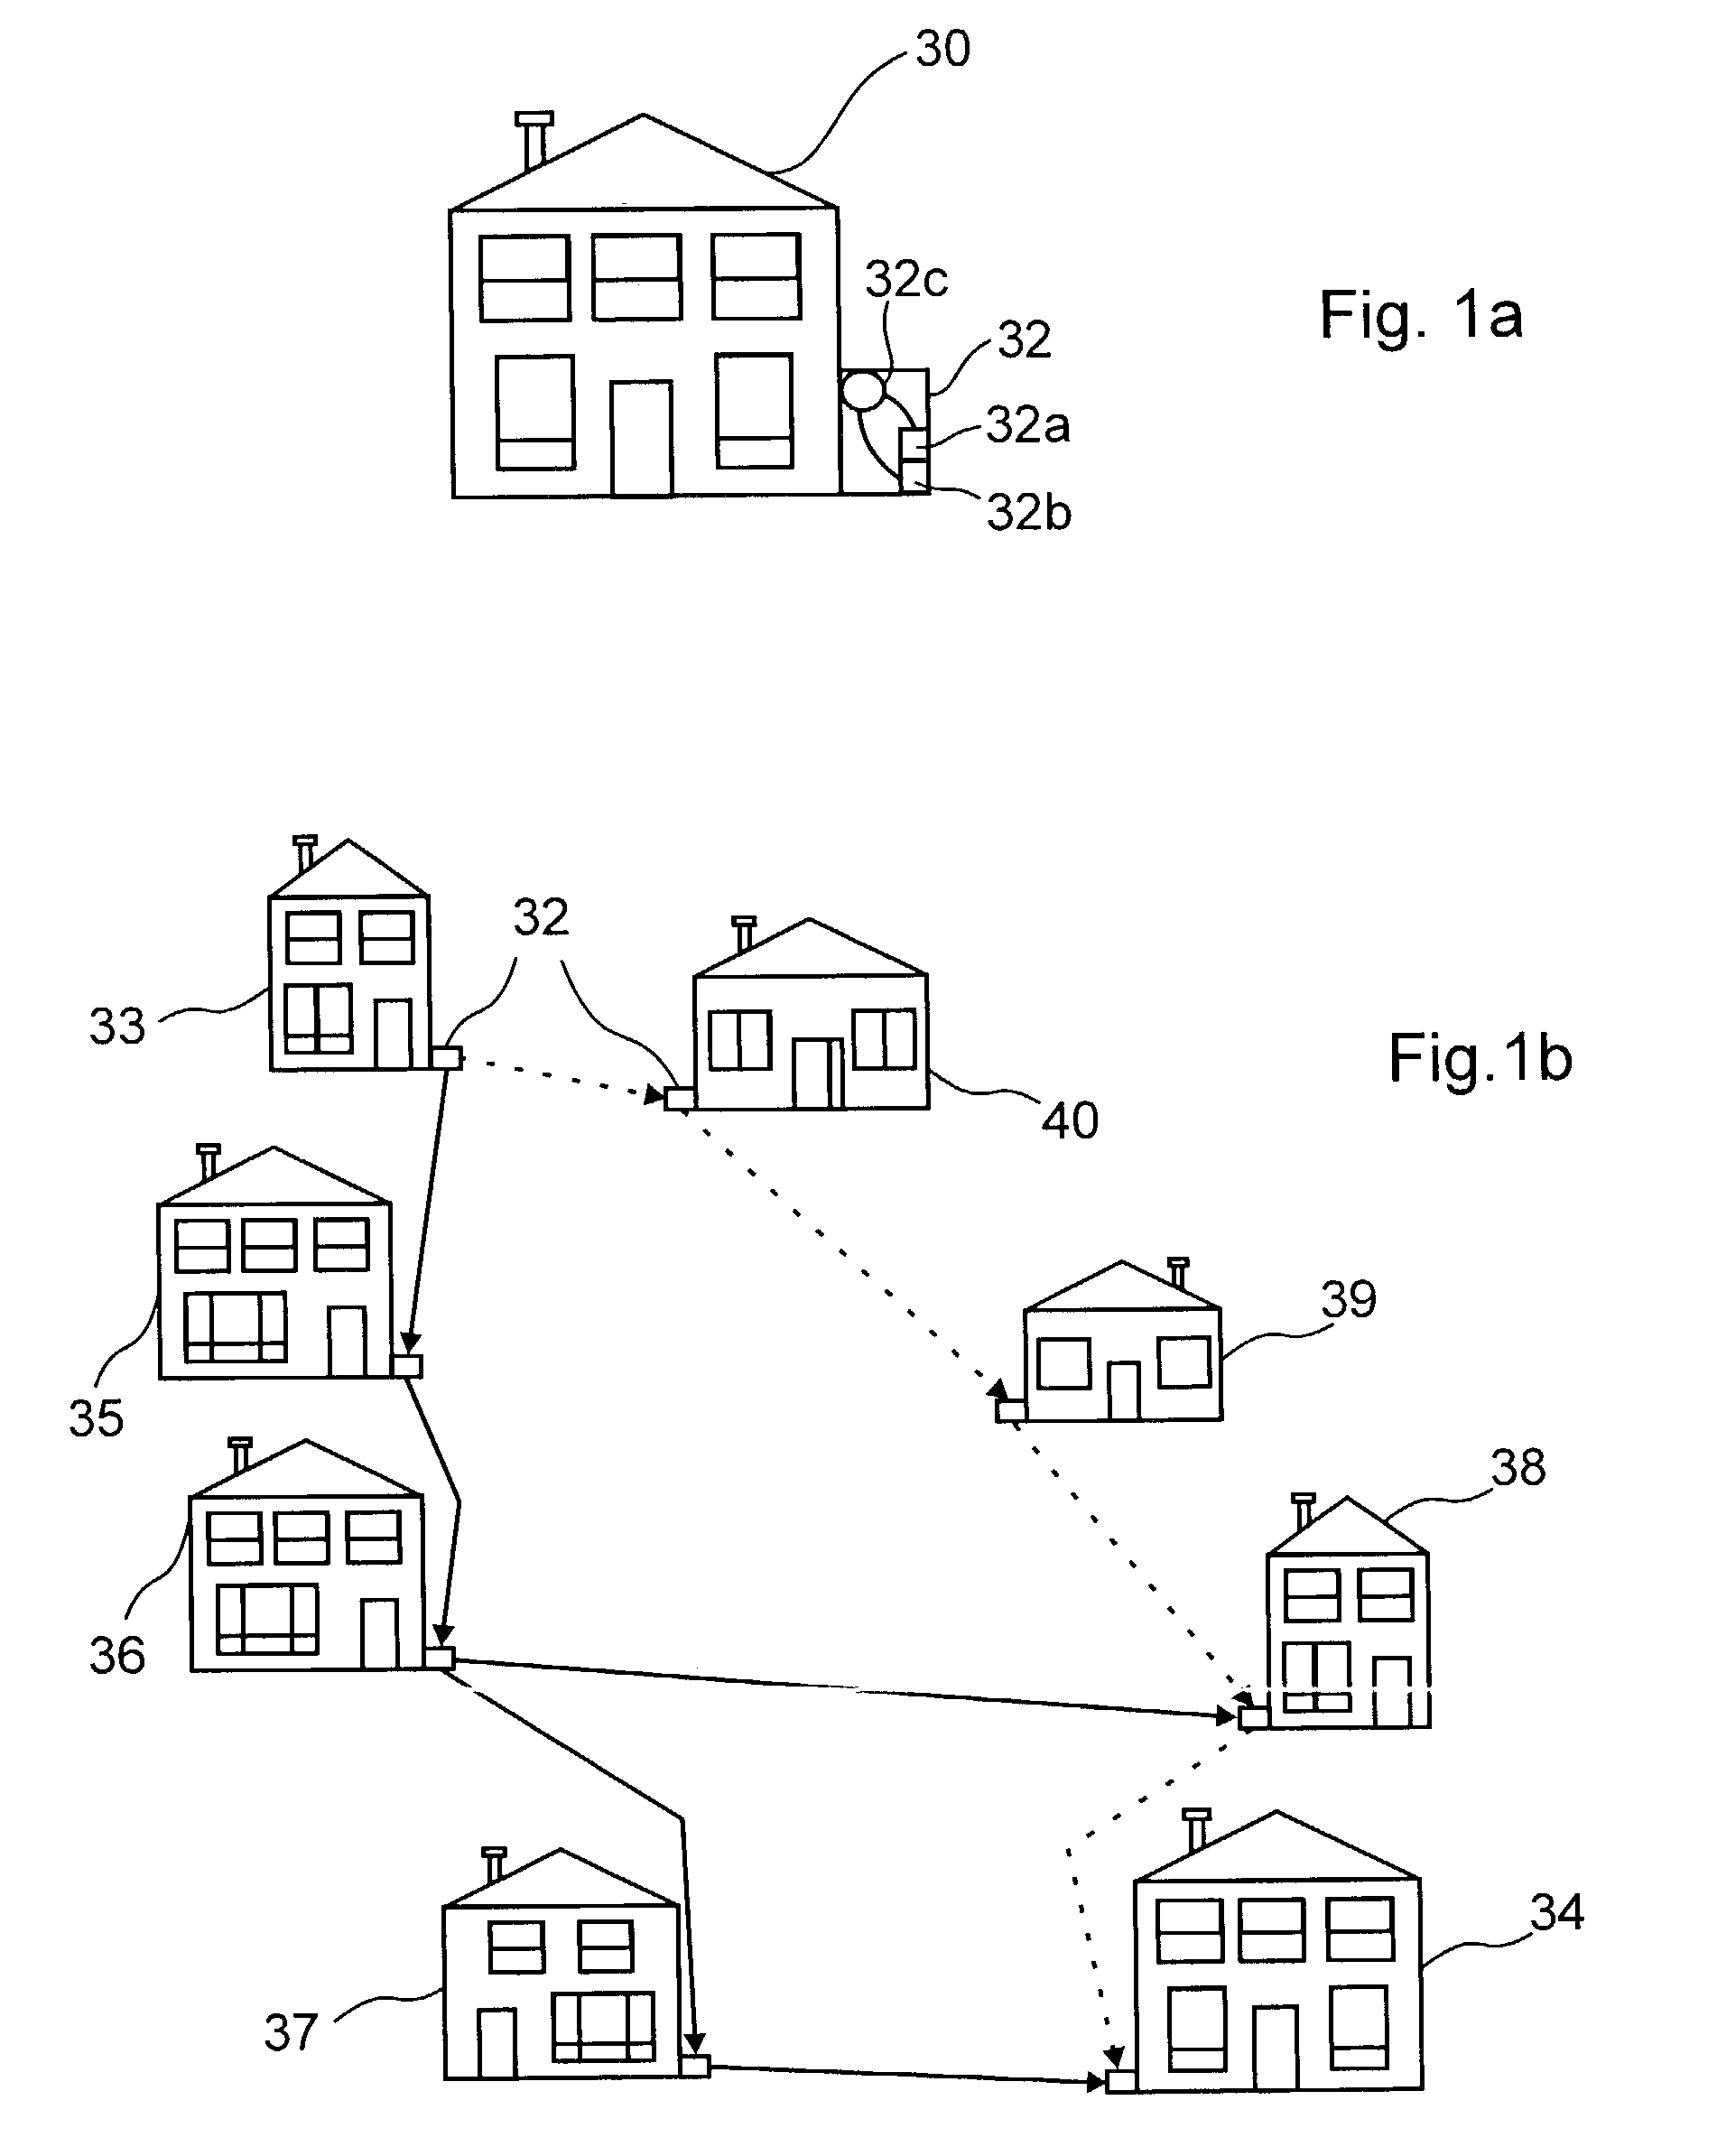 Communication nodes for use with a wireless ad-hoc communication network